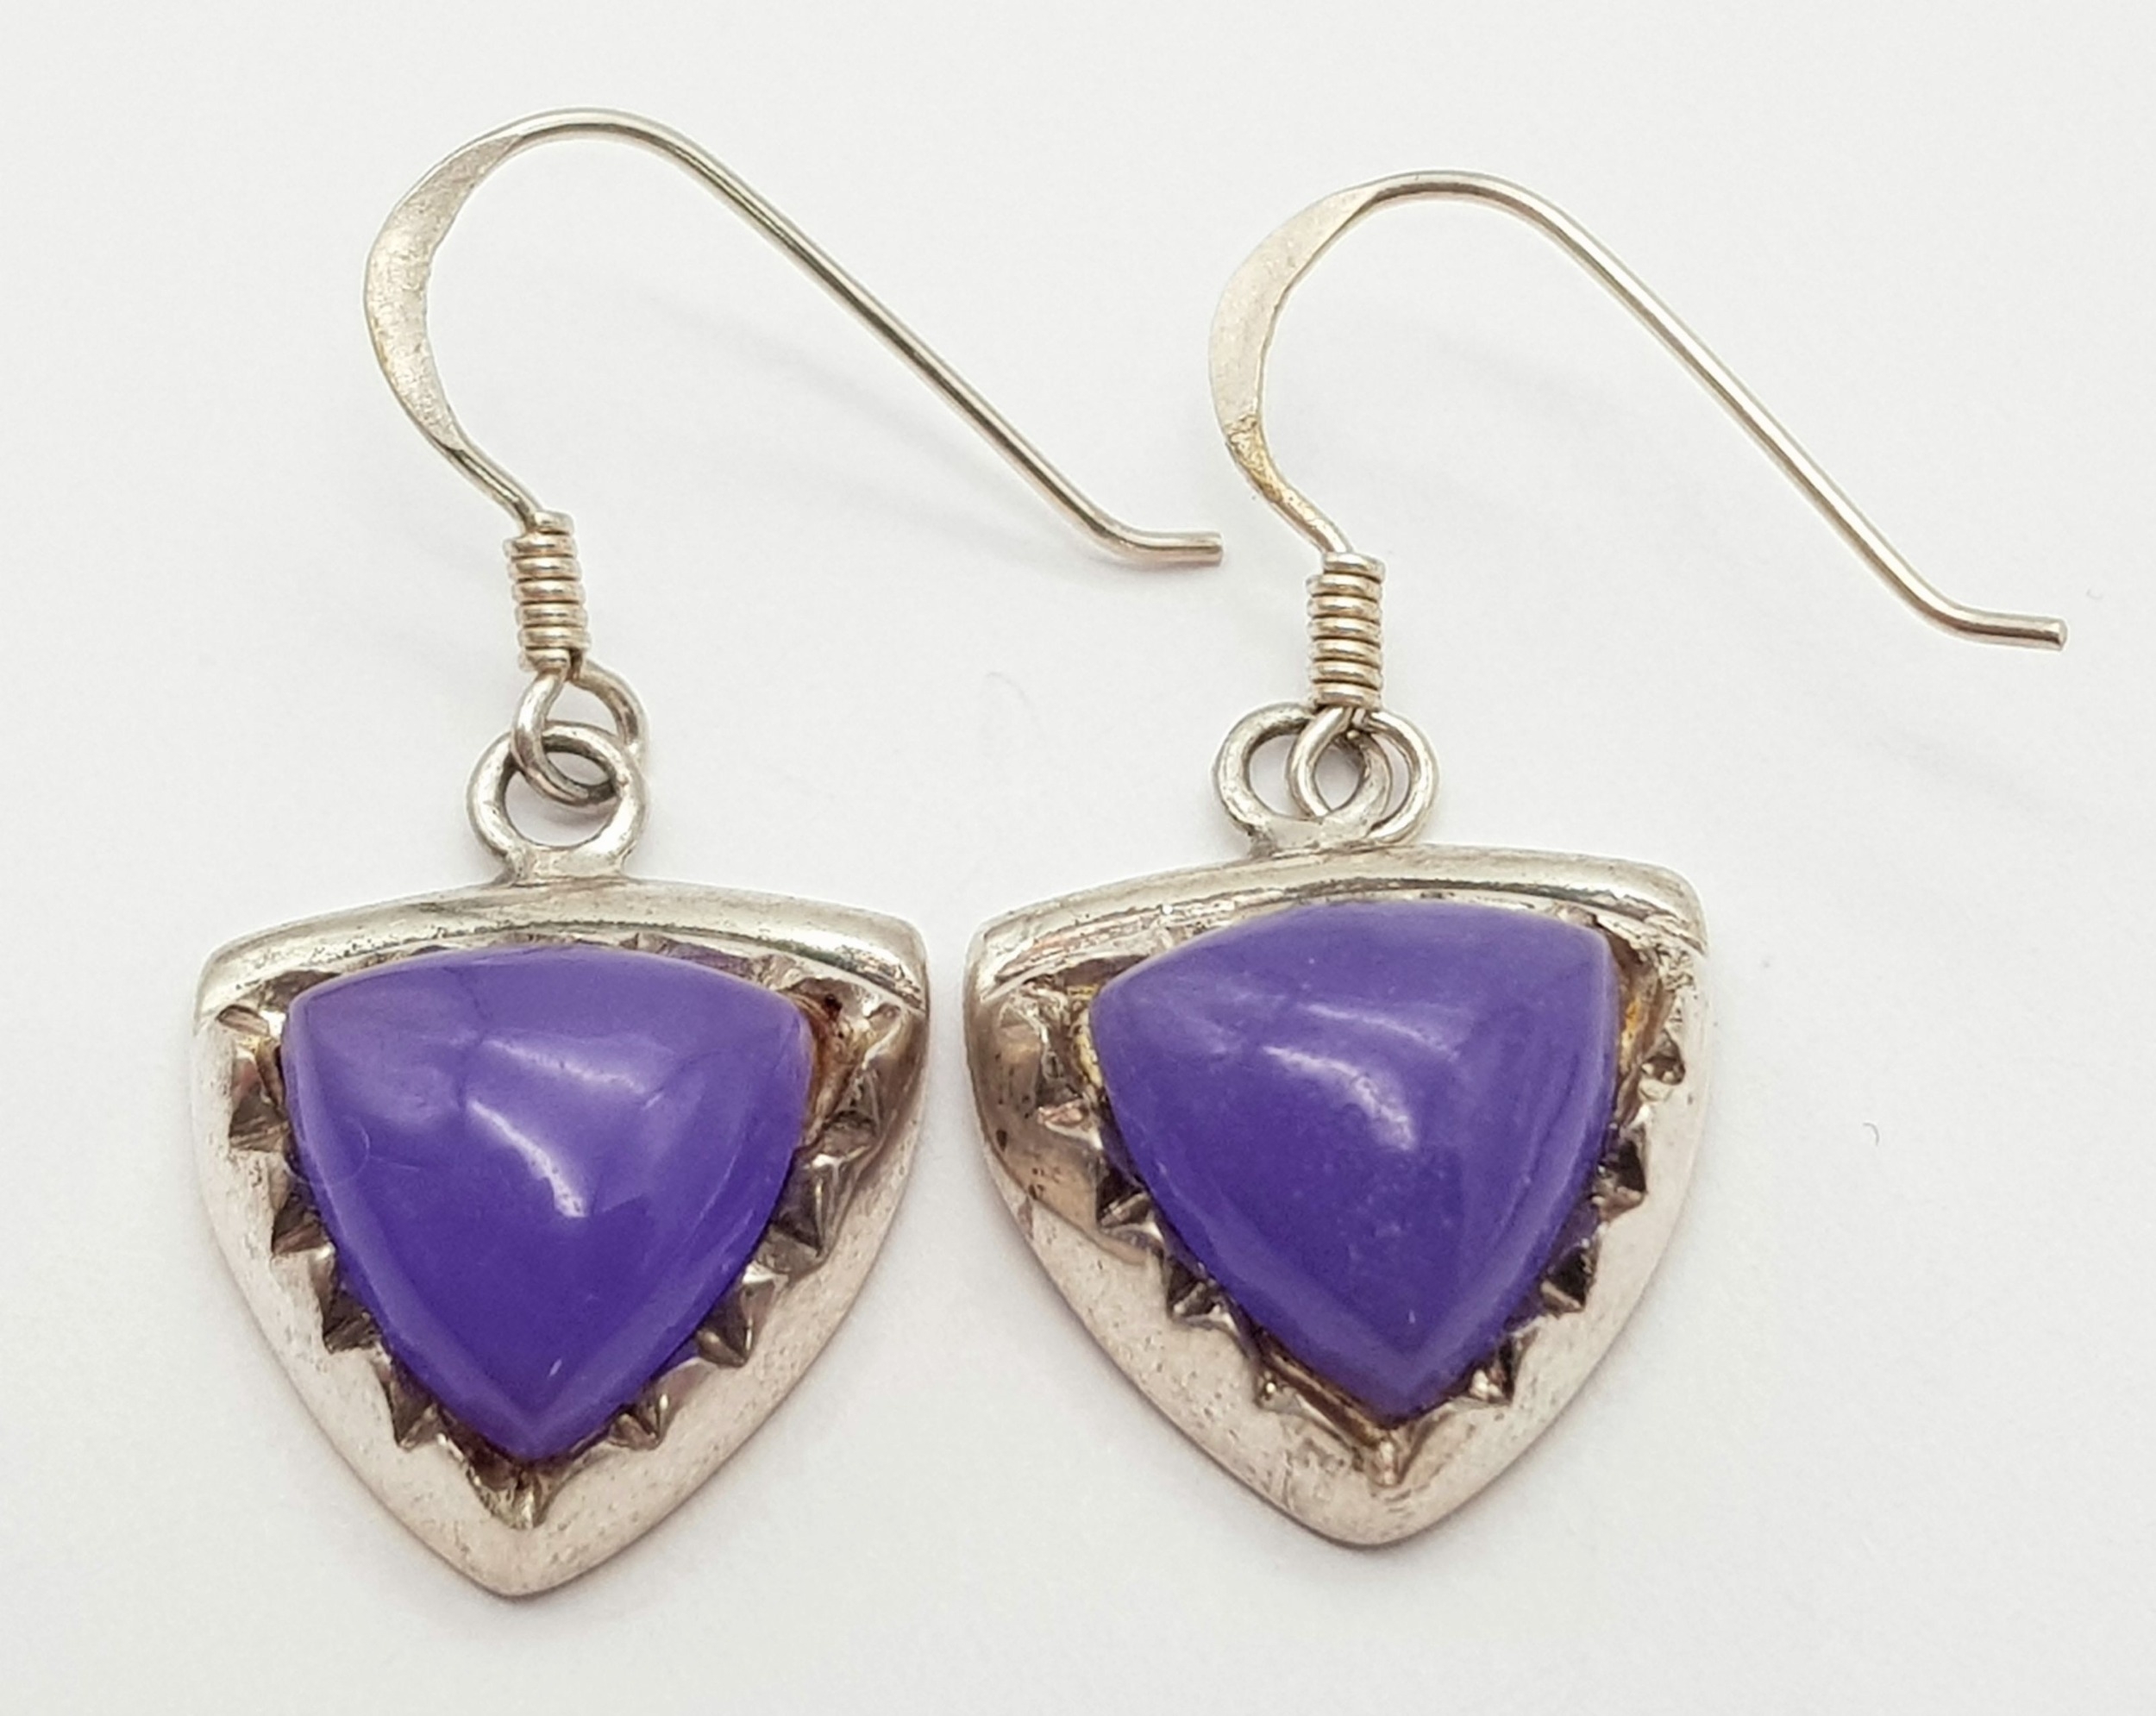 A Pair of Sterling Silver Trillion Cut Lavender Jade Earrings. 3cm Drop. Set with 1cm Wide